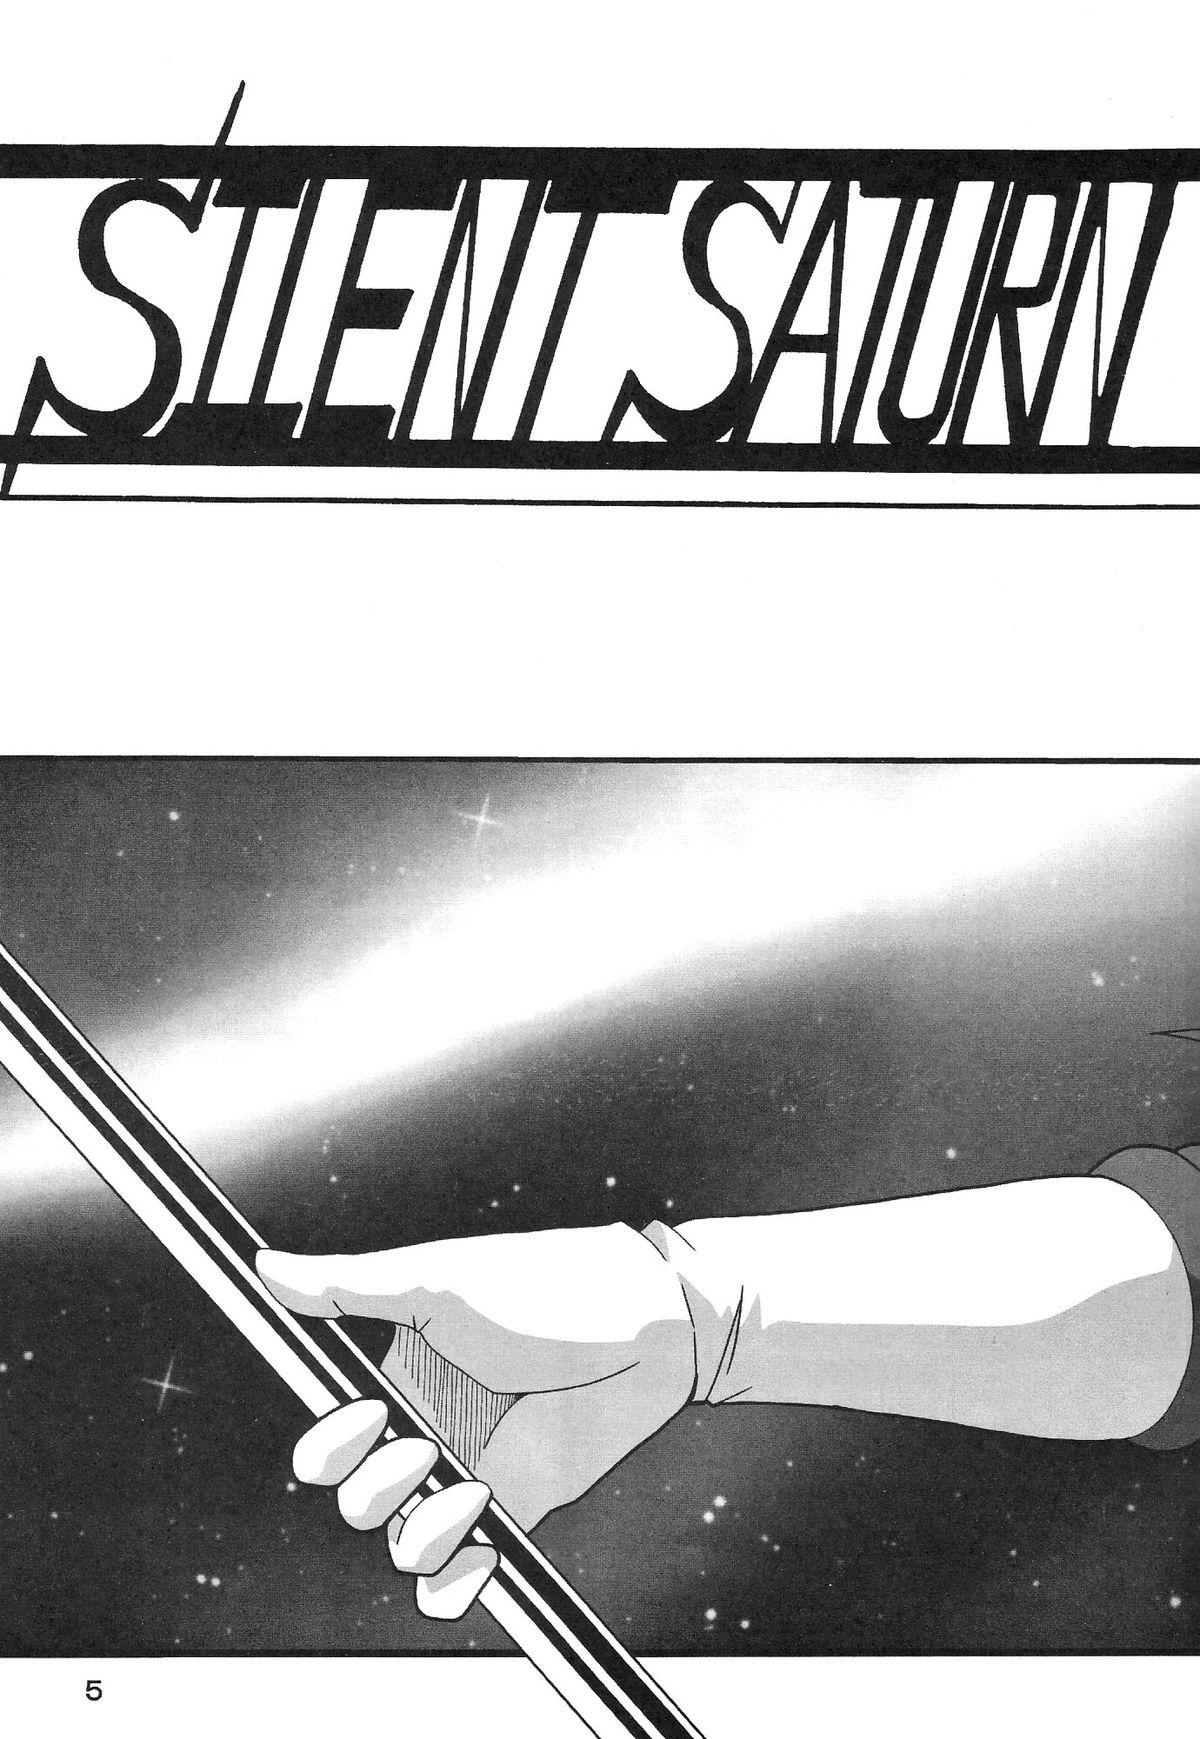 Moms Silent Saturn SS vol. 8 - Sailor moon Glory Hole - Page 5